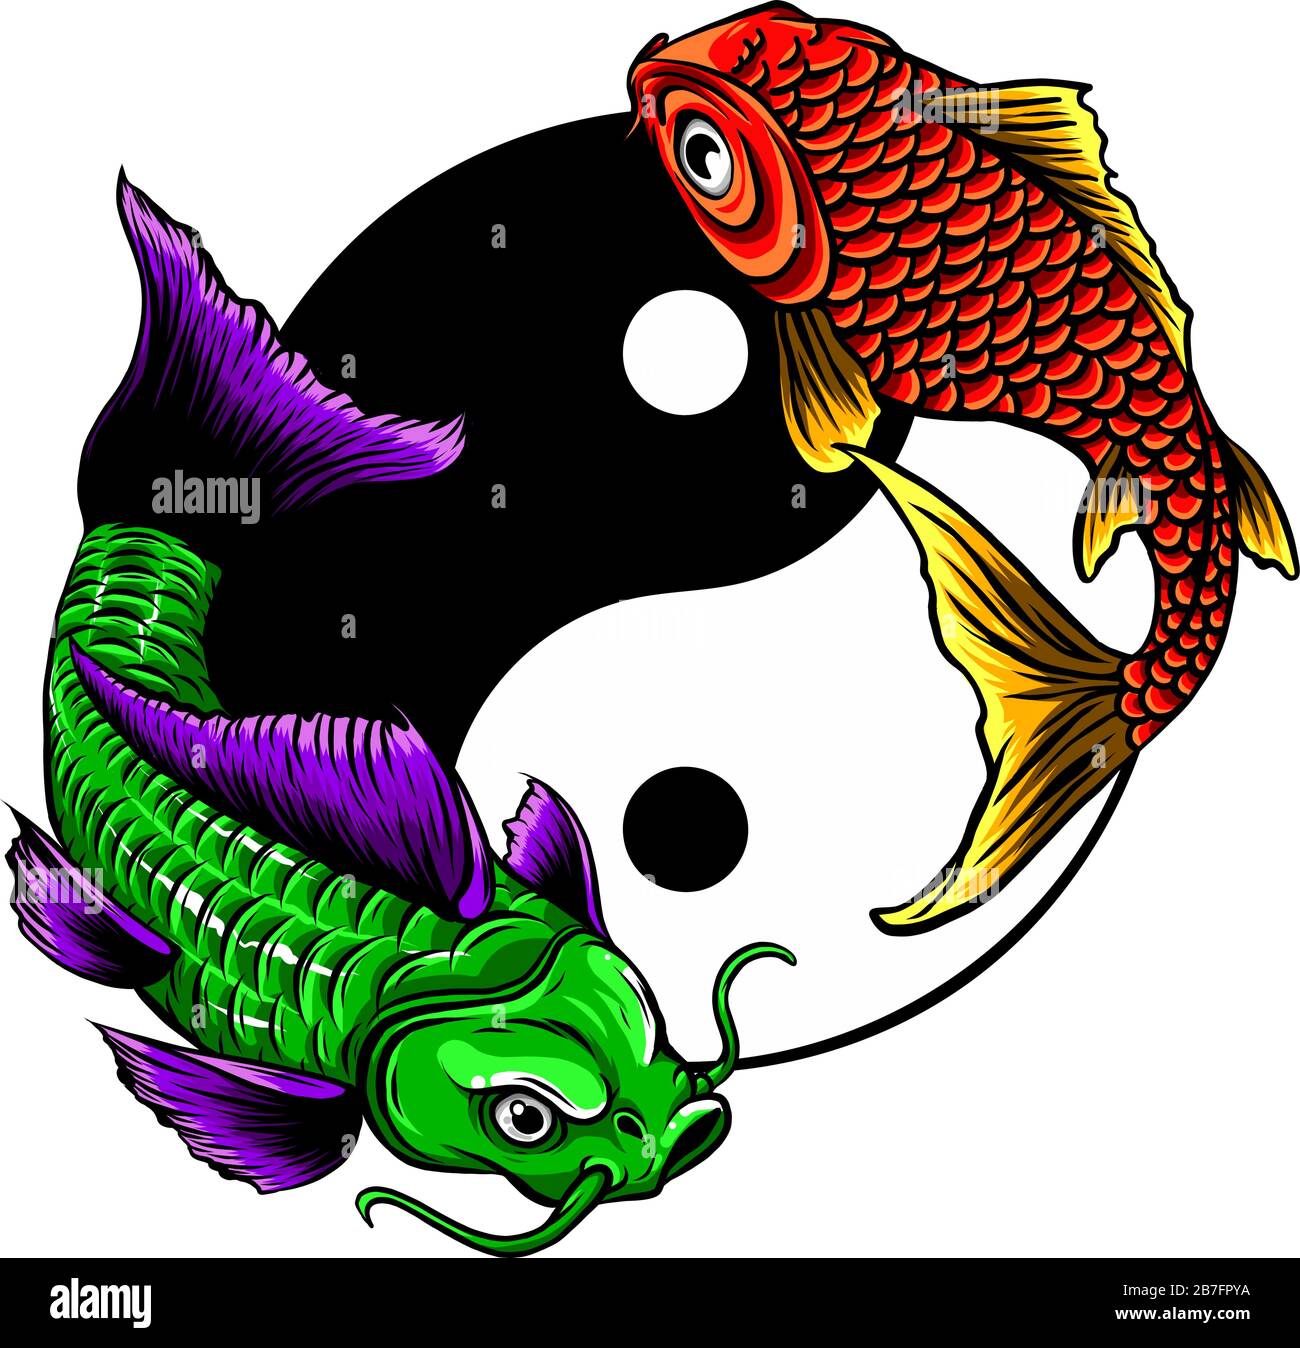 Ying Yang symbol with koi fishes. Vector illustration Stock Vector